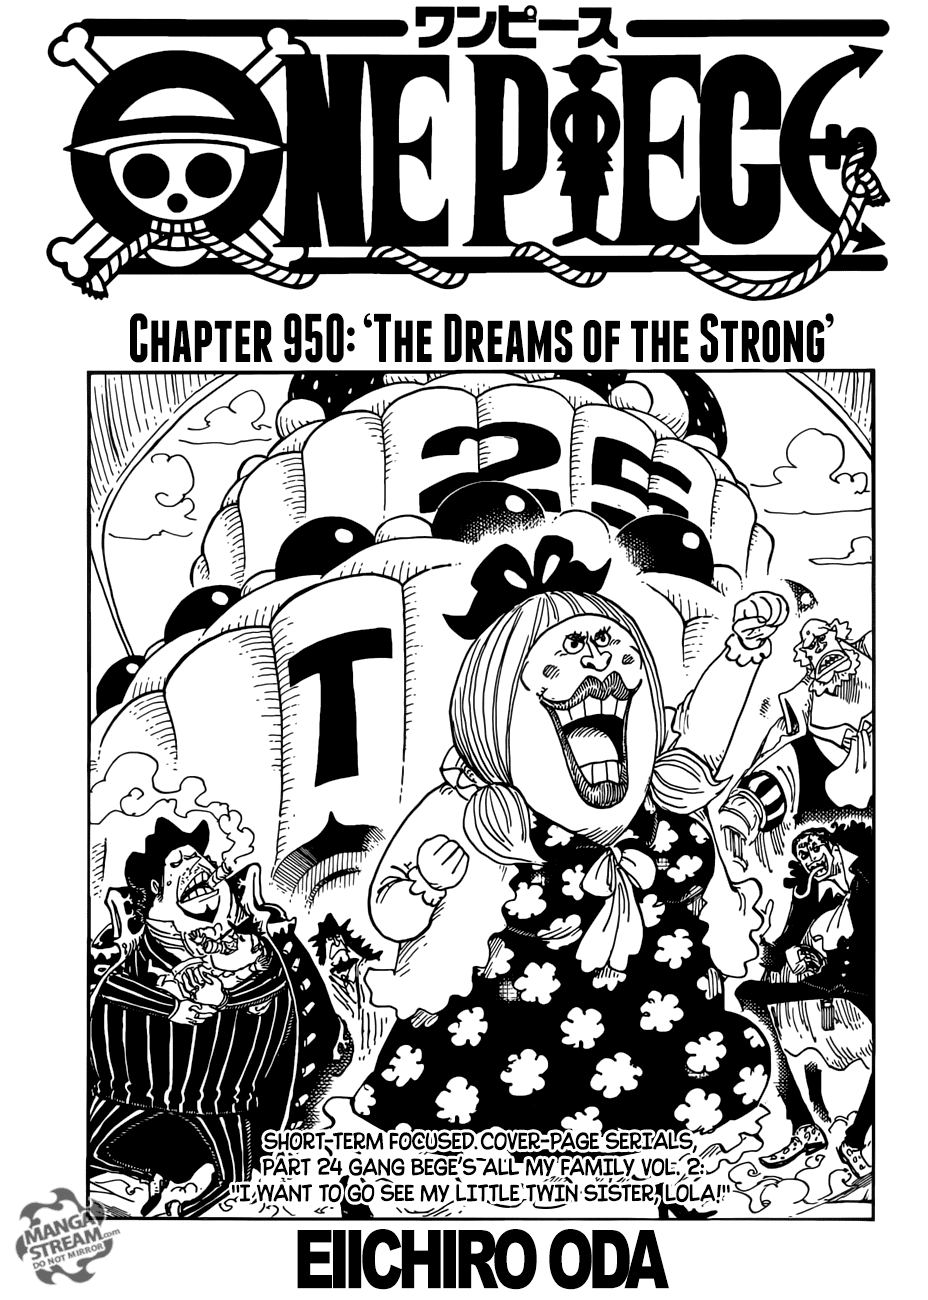 Ninjamonkey One Piece Chapter 950 The Dreams Of The Strong